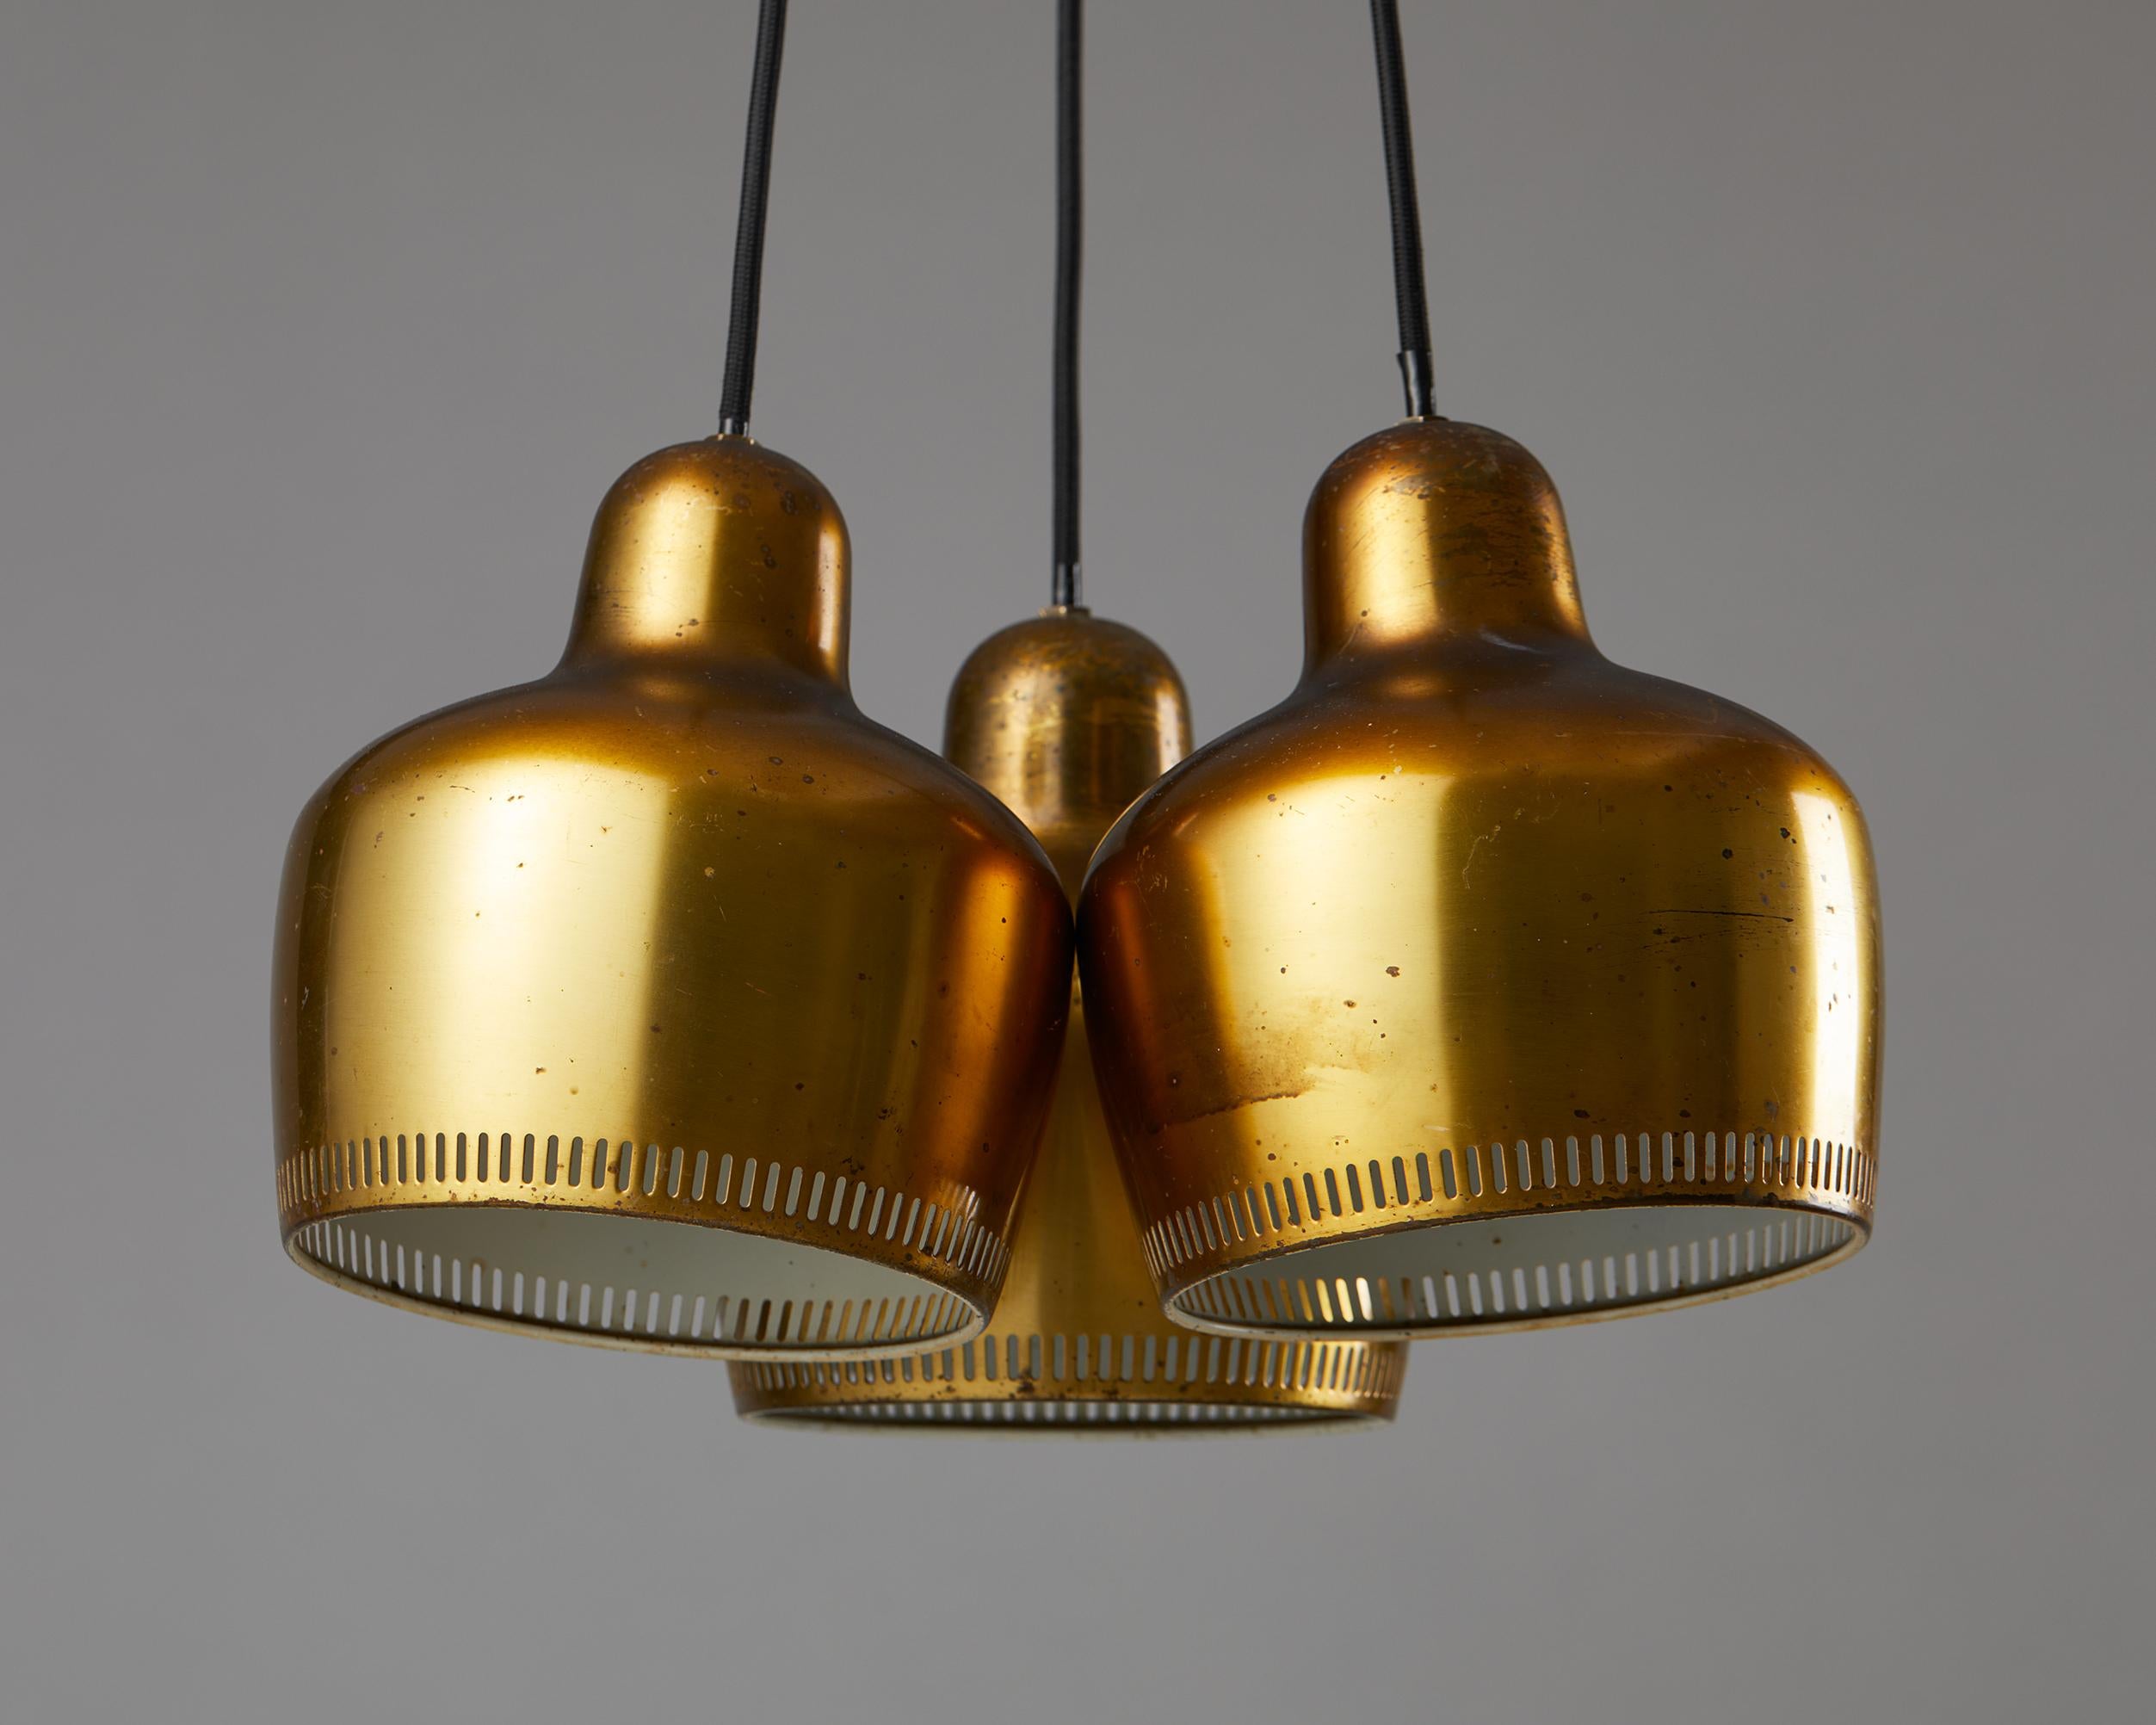 20th Century Set of Three ‘Golden Bell’ Ceiling Lamps Model A 330 Designed by Alvar Aalto